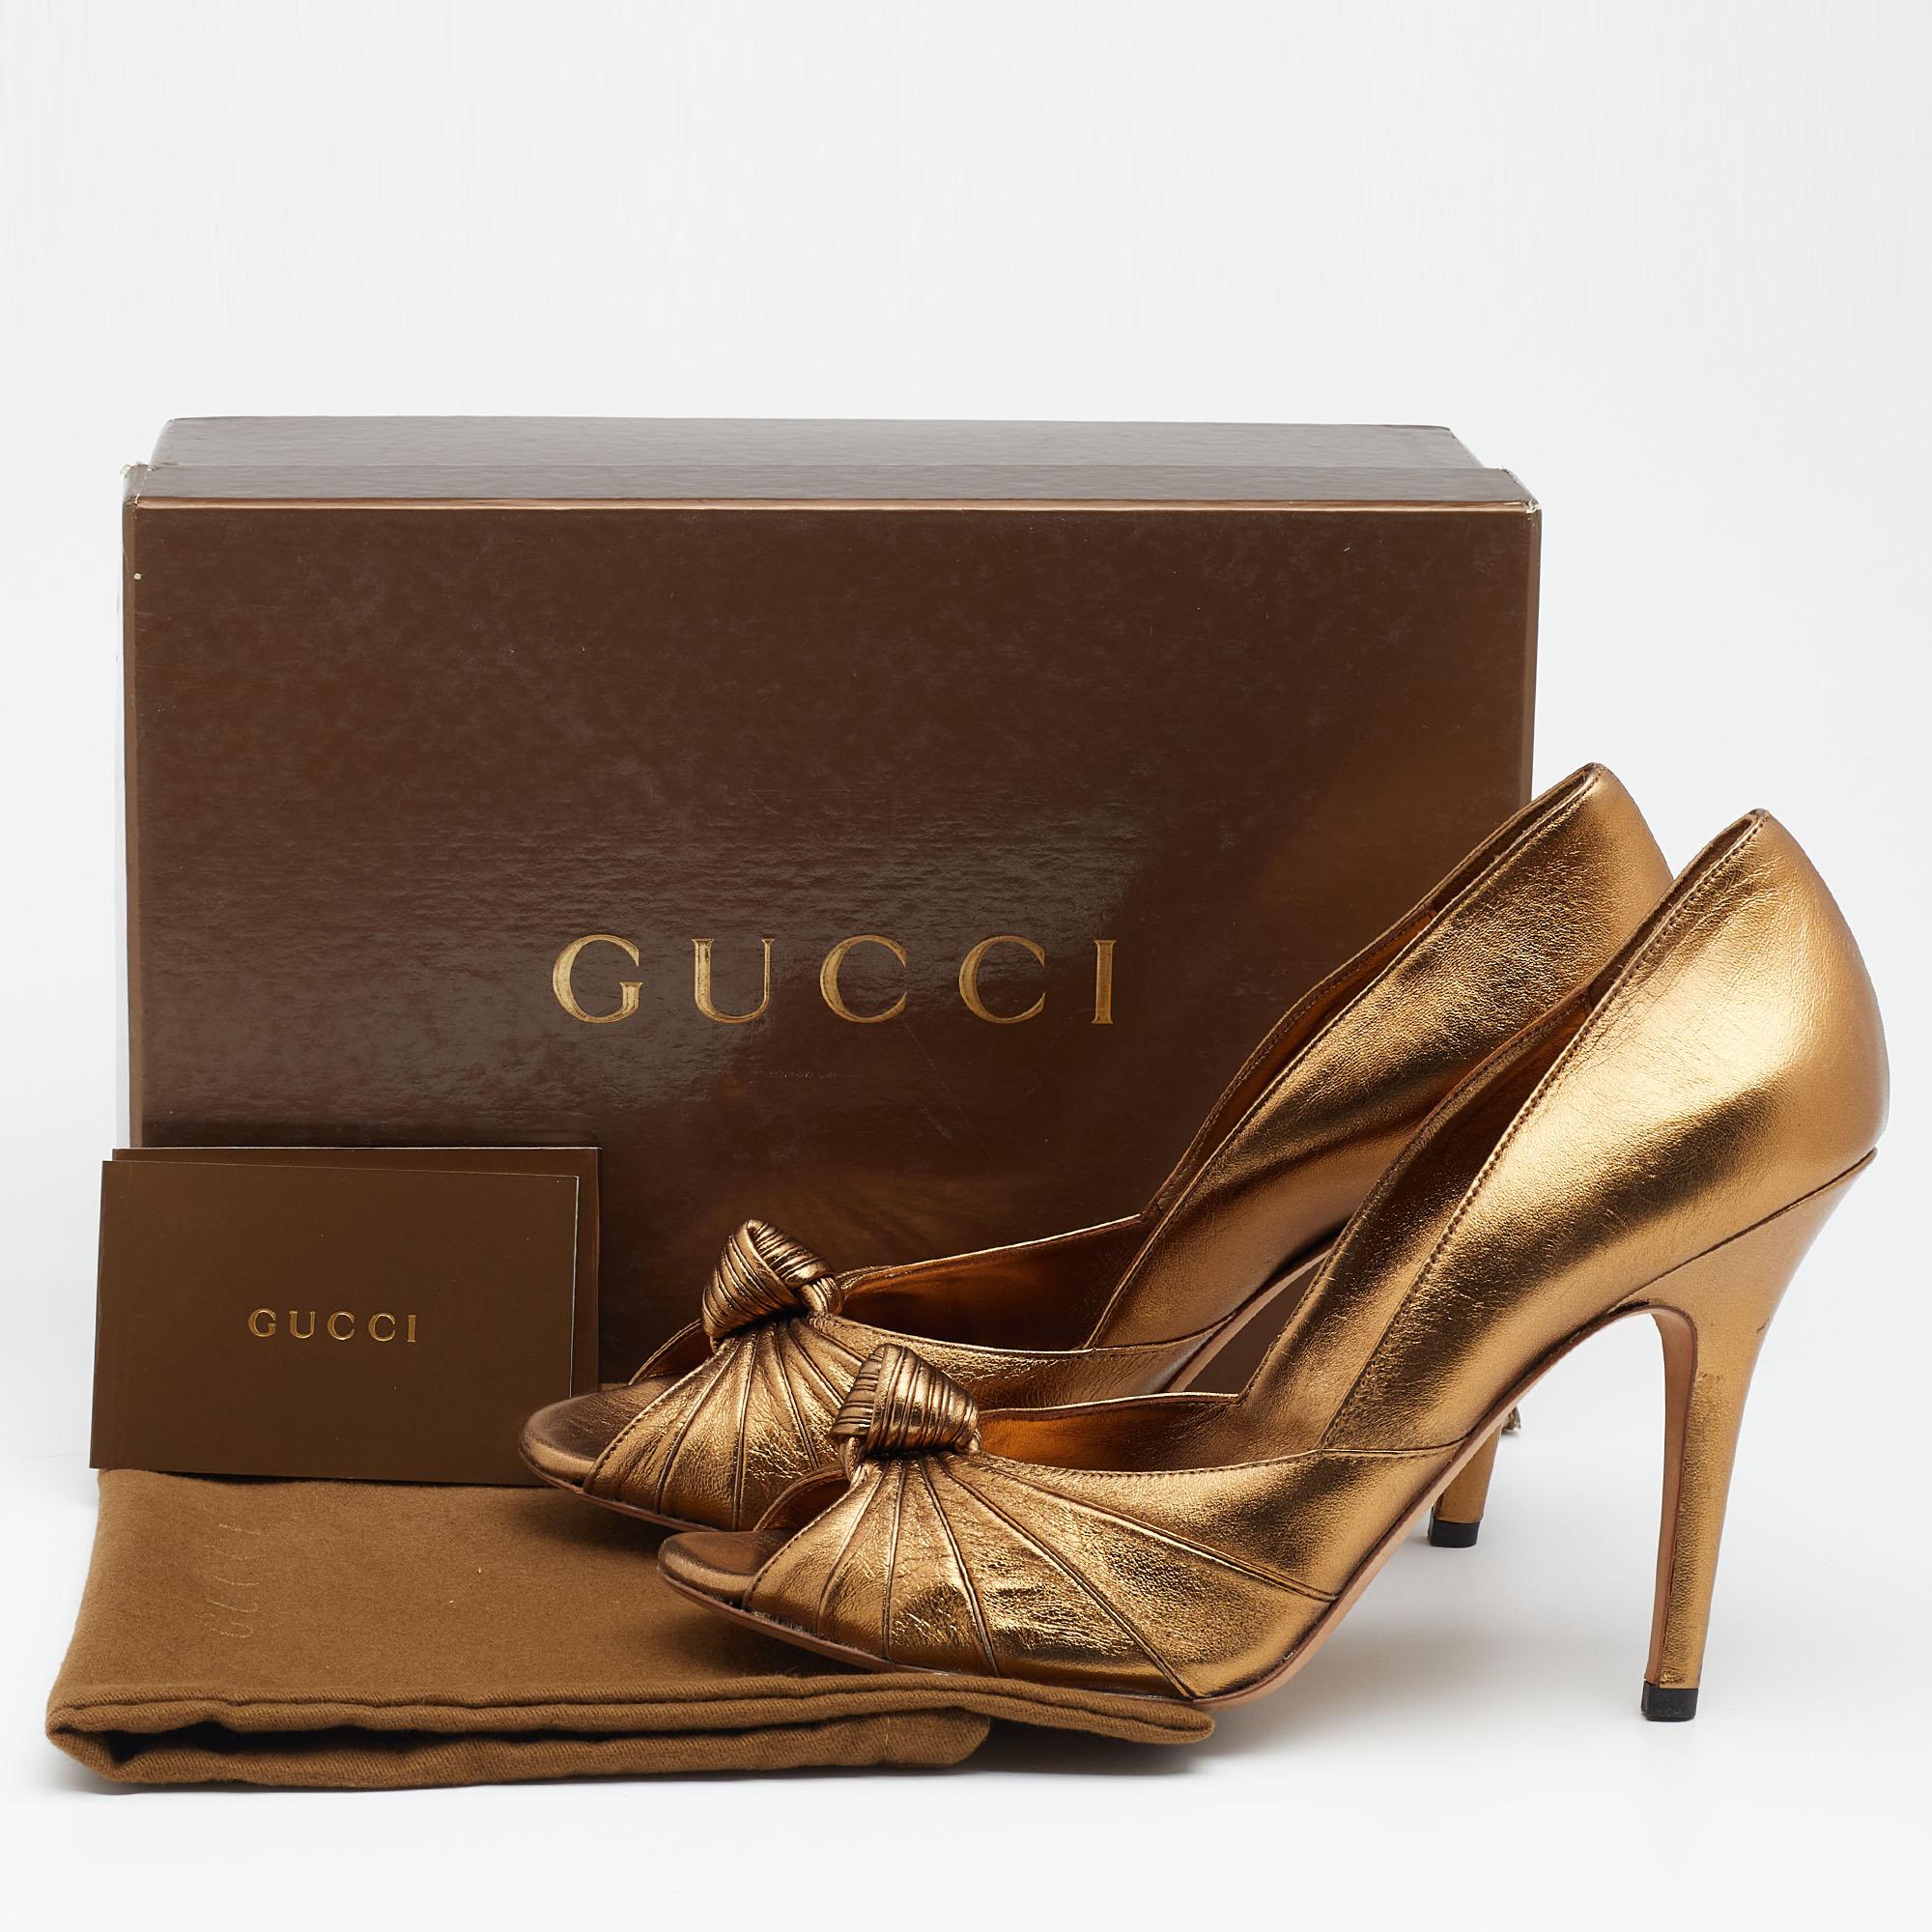 Gucci Metallic Gold Leather Knotted Peep Toe Pumps Size 40 For Sale 4